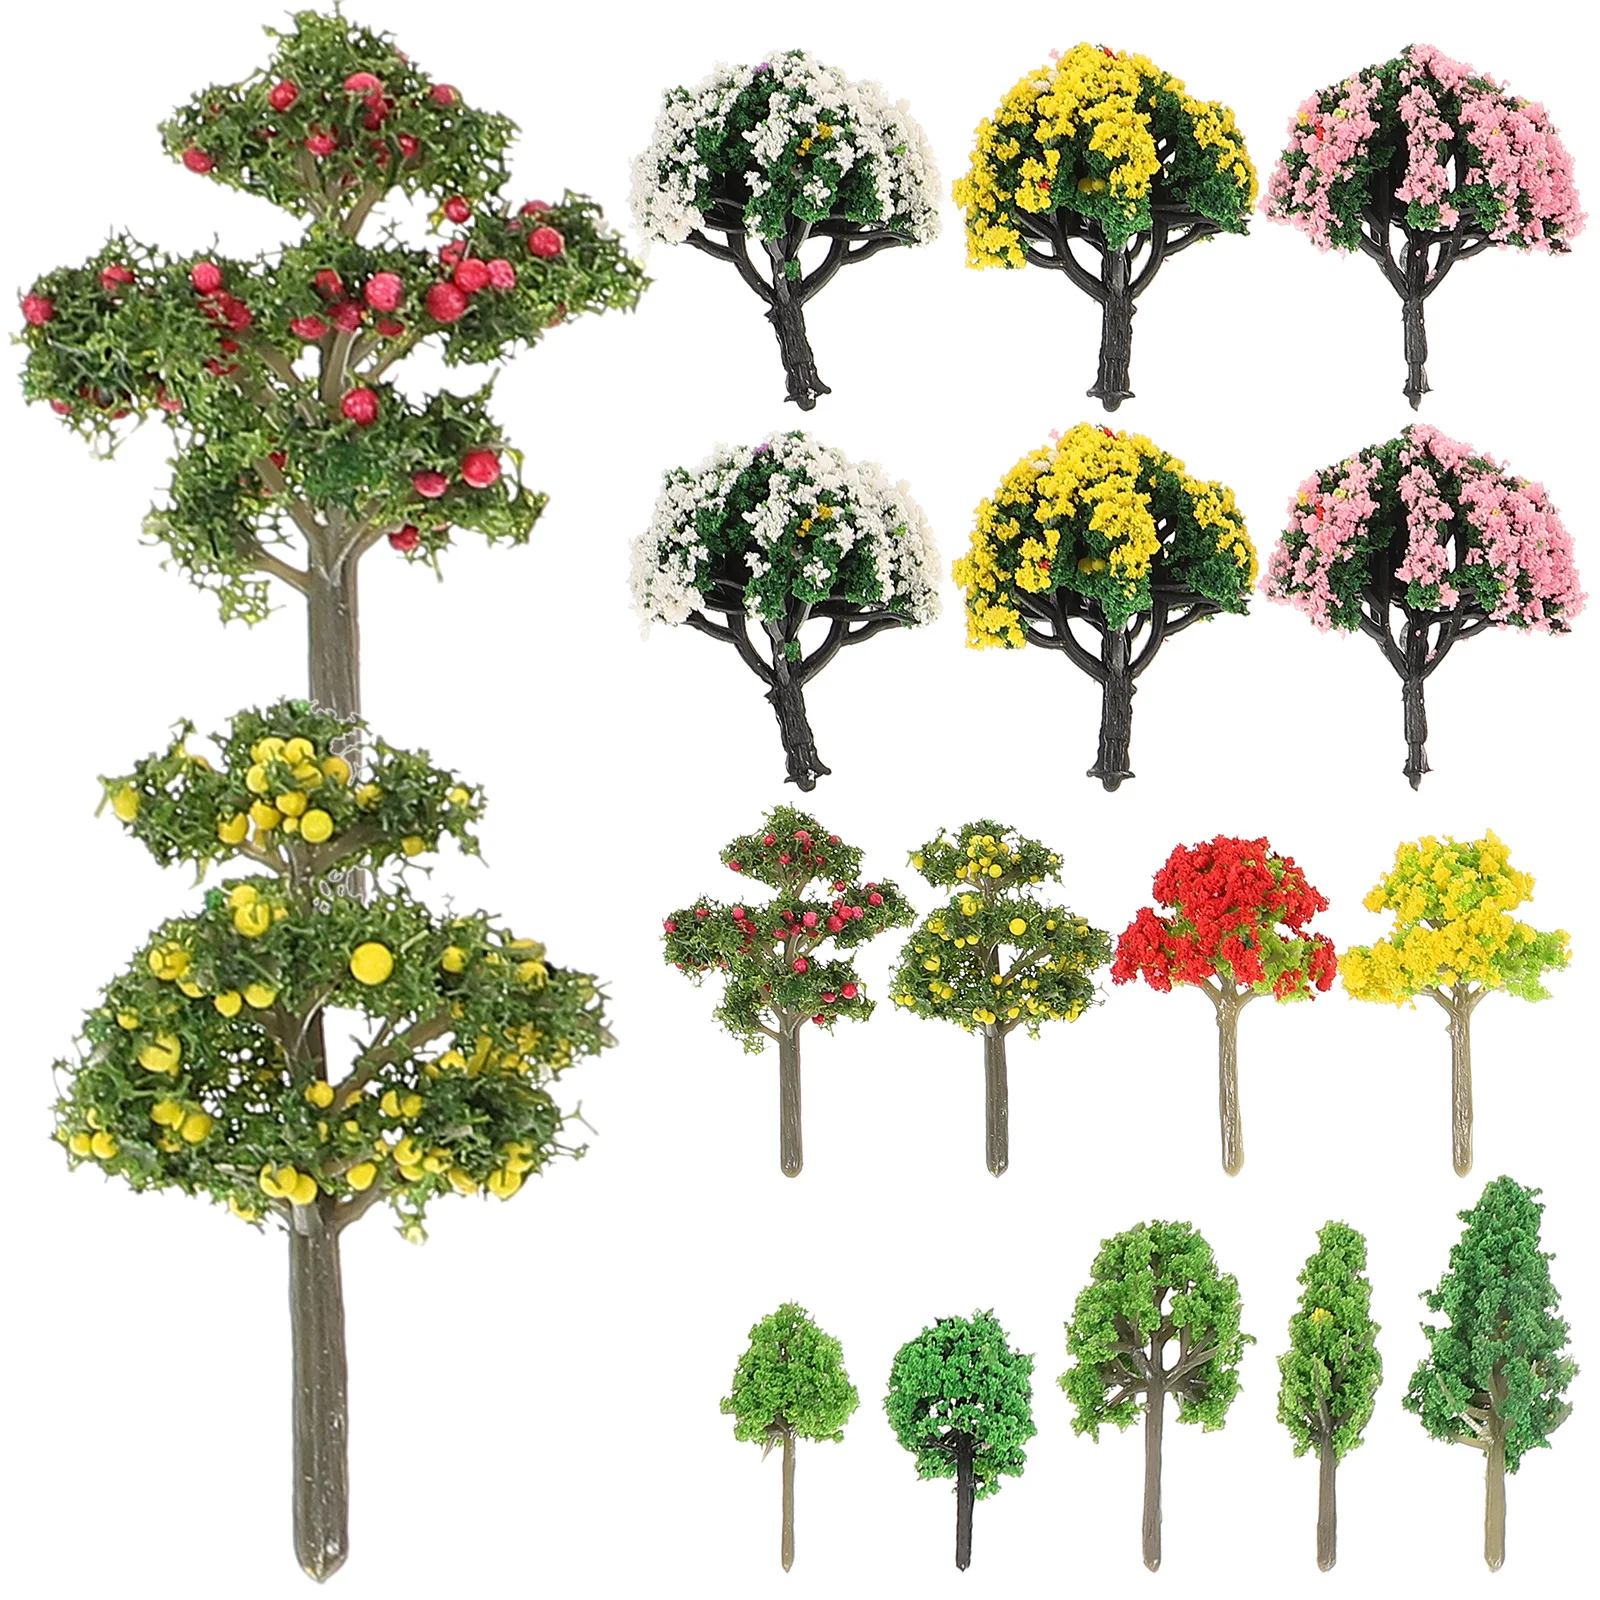 

60 Pcs Miniature Plants Ornaments Crafts Home Decors Architectural Model Tree Fake Decorations Sand Table Realistic Trees